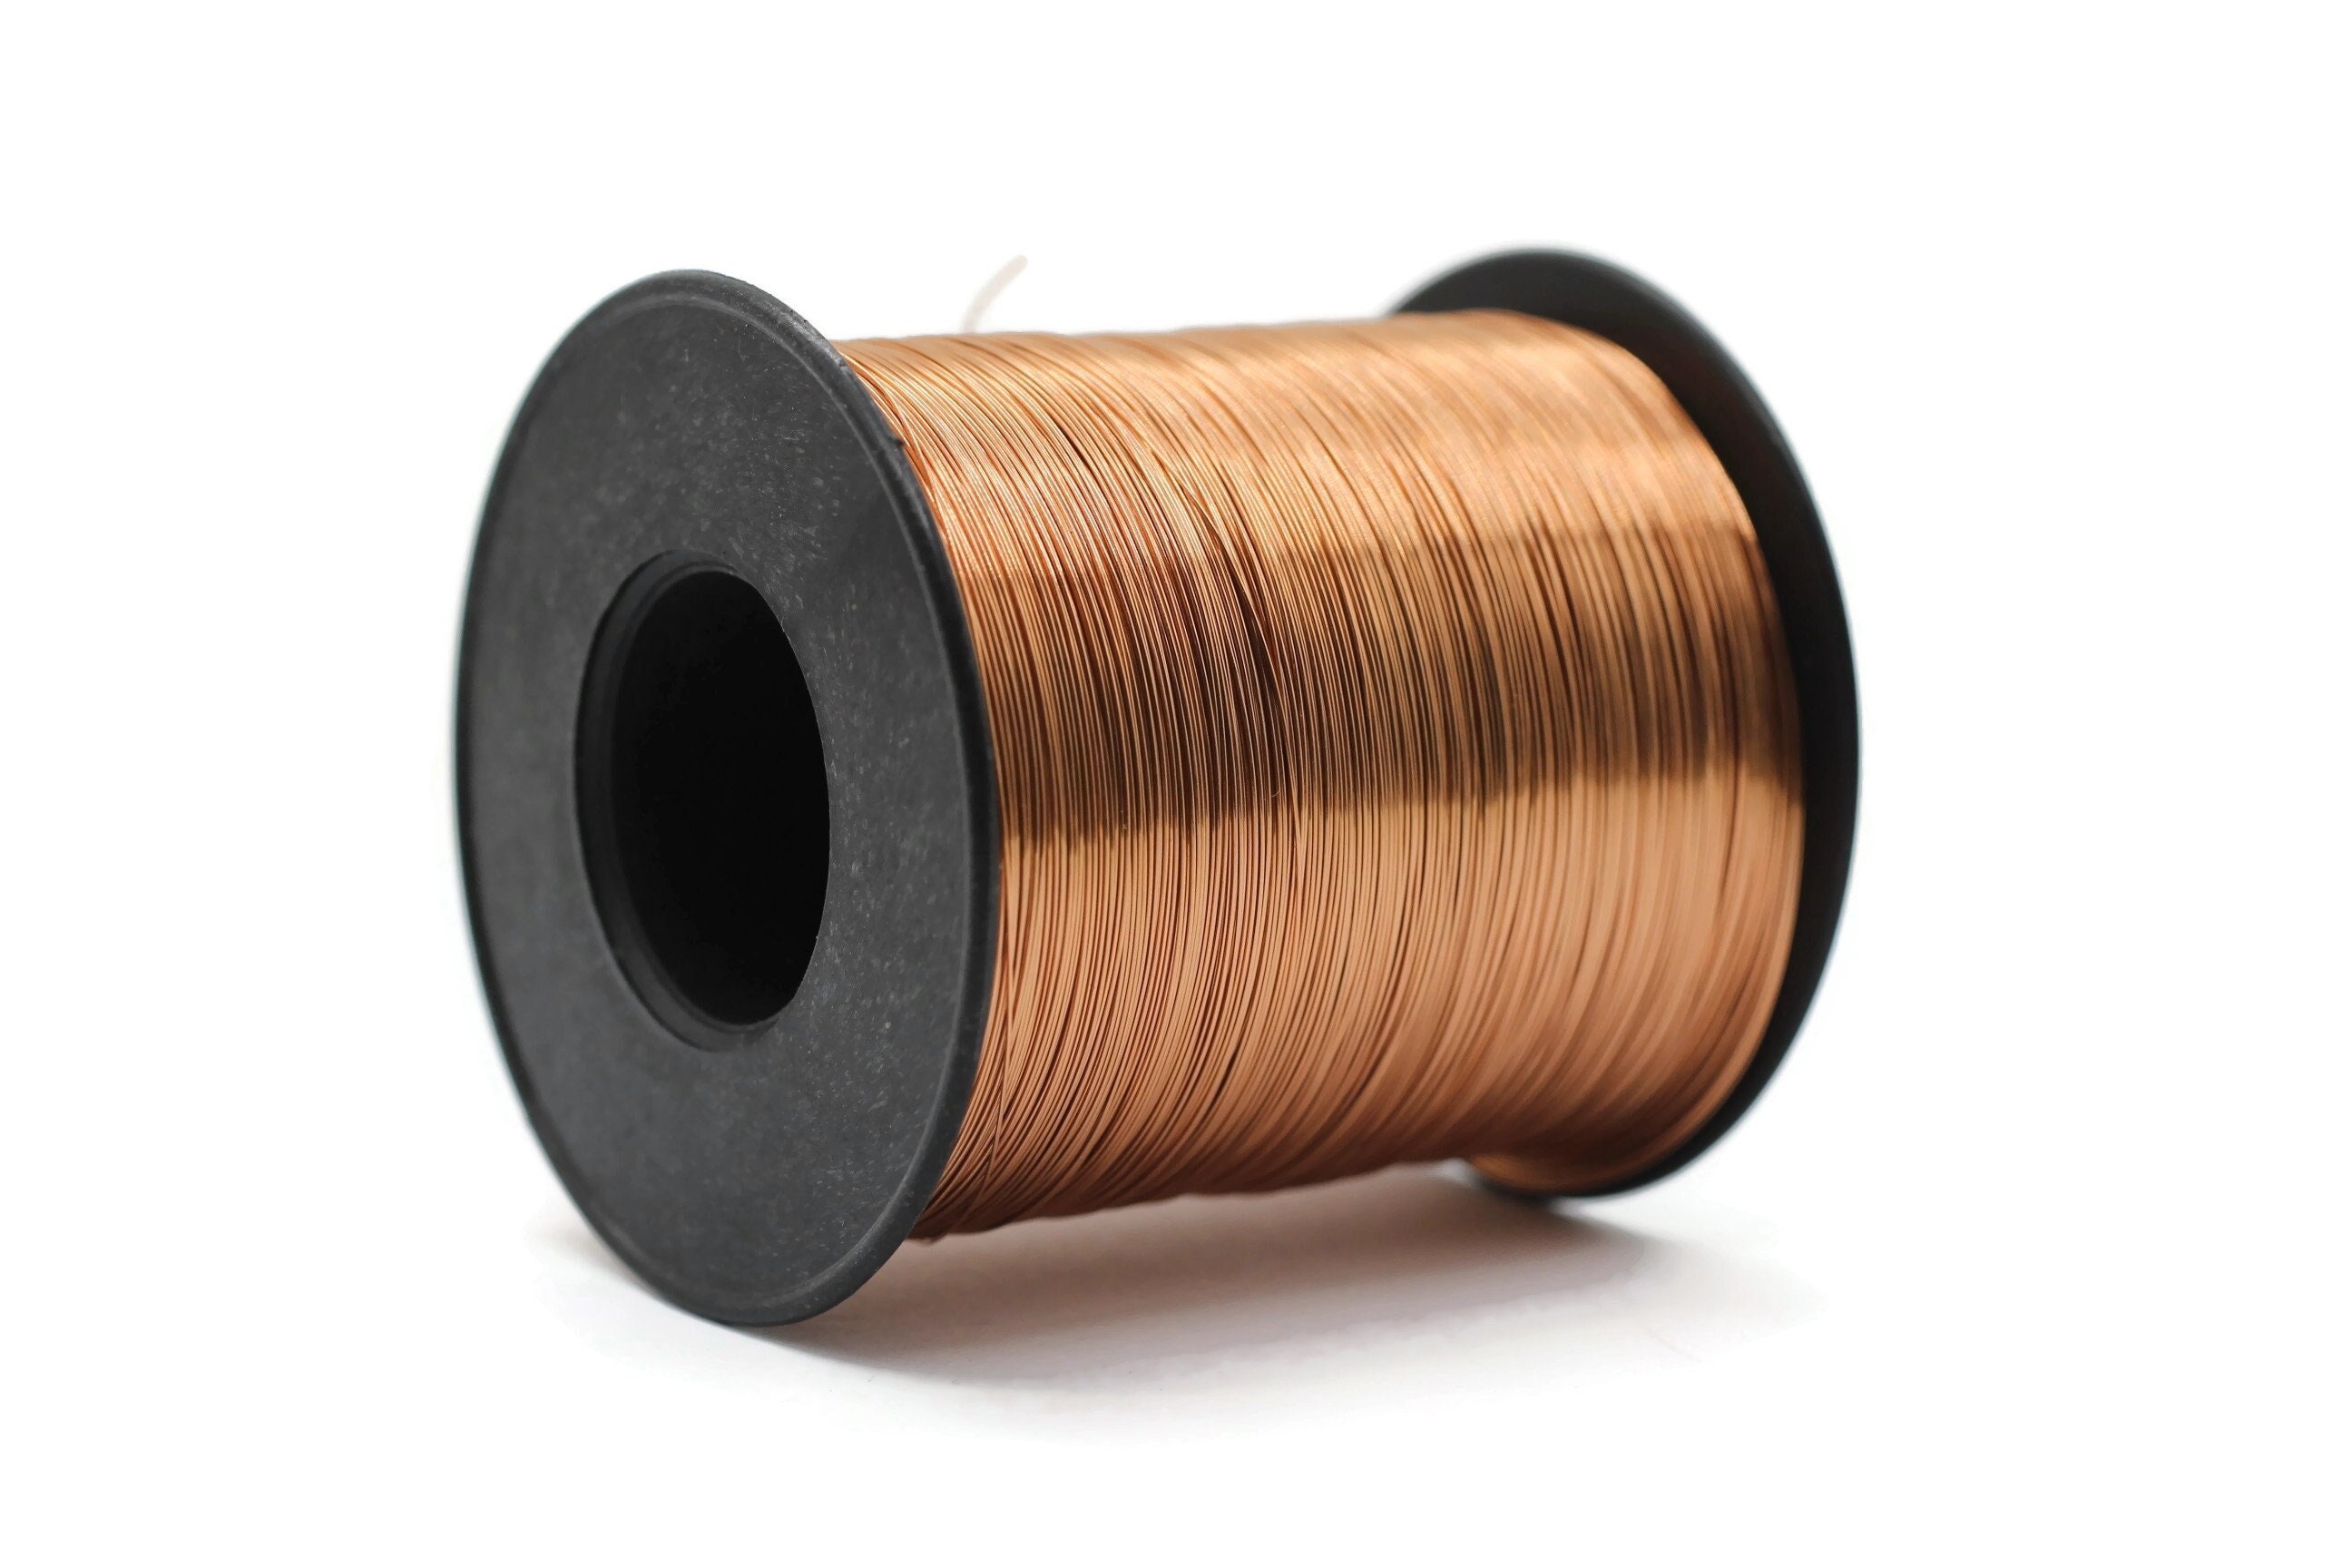 Pelopy Square Pure Copper Wire Solid Bare Copper Wire Square Wire for  Jewelry Making Dead Soft Square Wire Electrical Wire Jewelry Wire Tarnish  Resistant,1 lb Roll (16Gauge,98' Length, 0.051'' Dia) - Yahoo